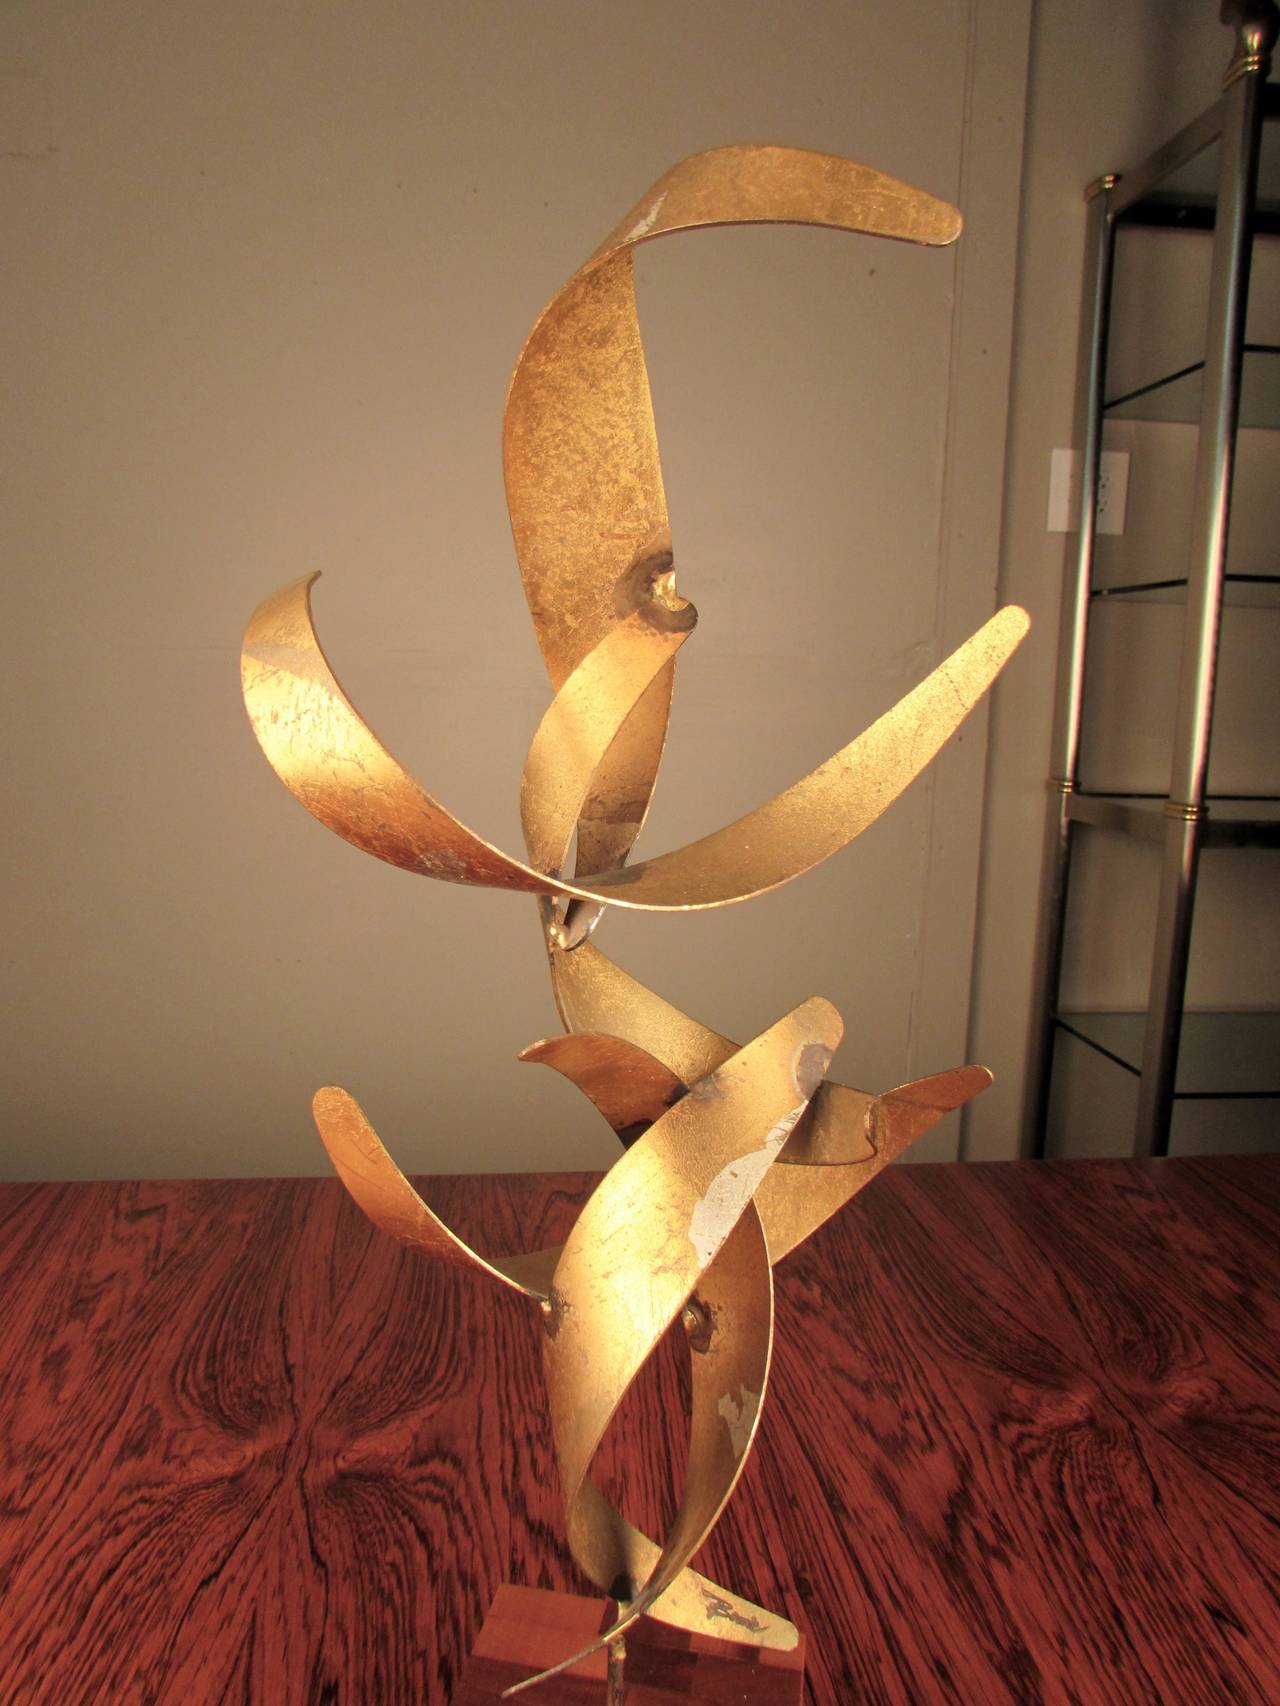 Rare gilded table sculpture signed by William Bowie on staved teak base, circa 1960. This piece is very unusual as most of Bowie's pieces are wall-mounted forms. This delightful gem is a series of rolled steel ribbons welded together to form a flame